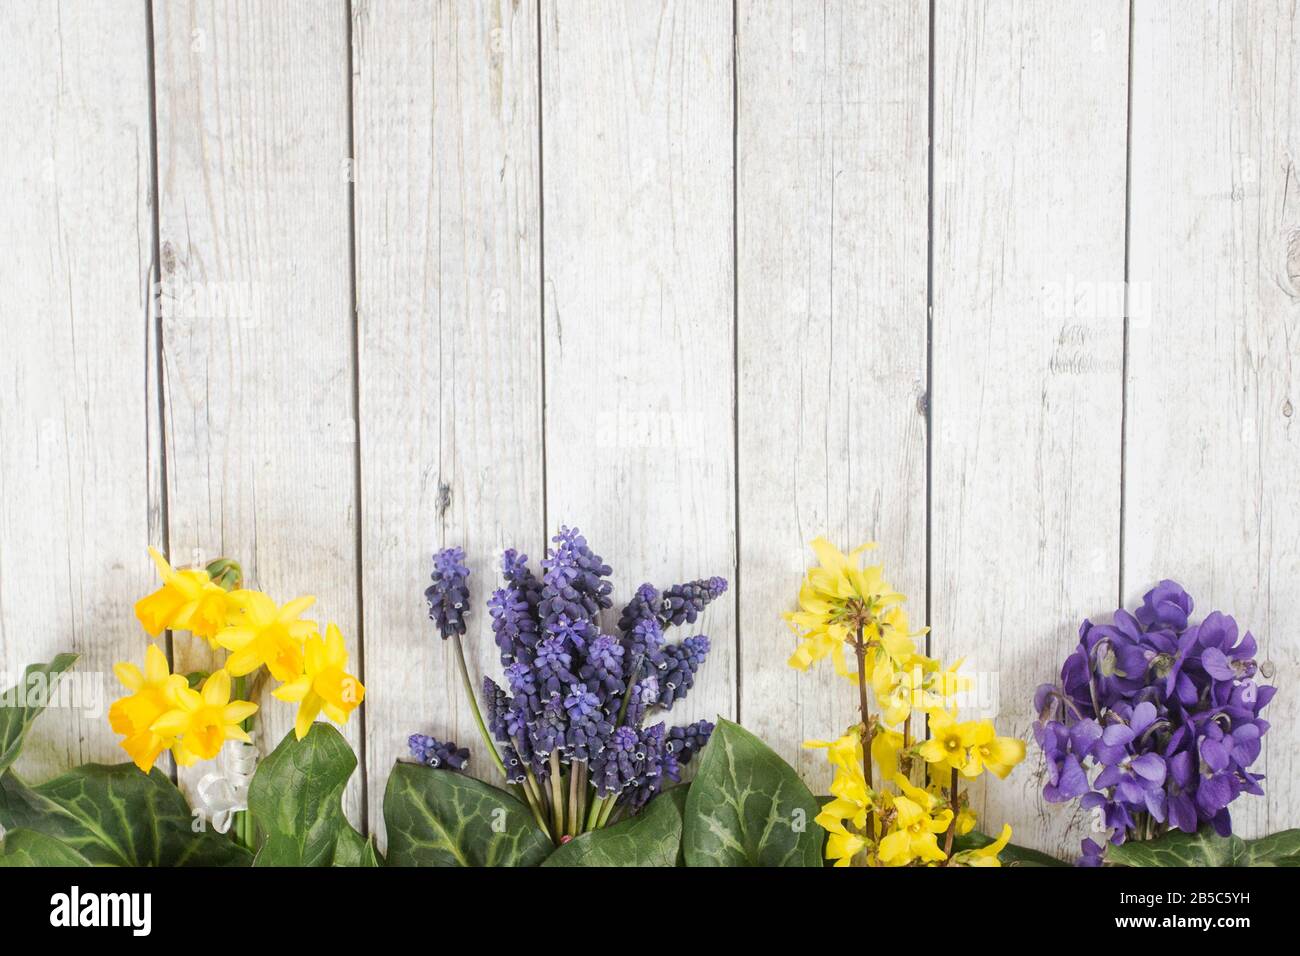 One of the first spring flowers on the wooden background, arranged in the bouquet Stock Photo